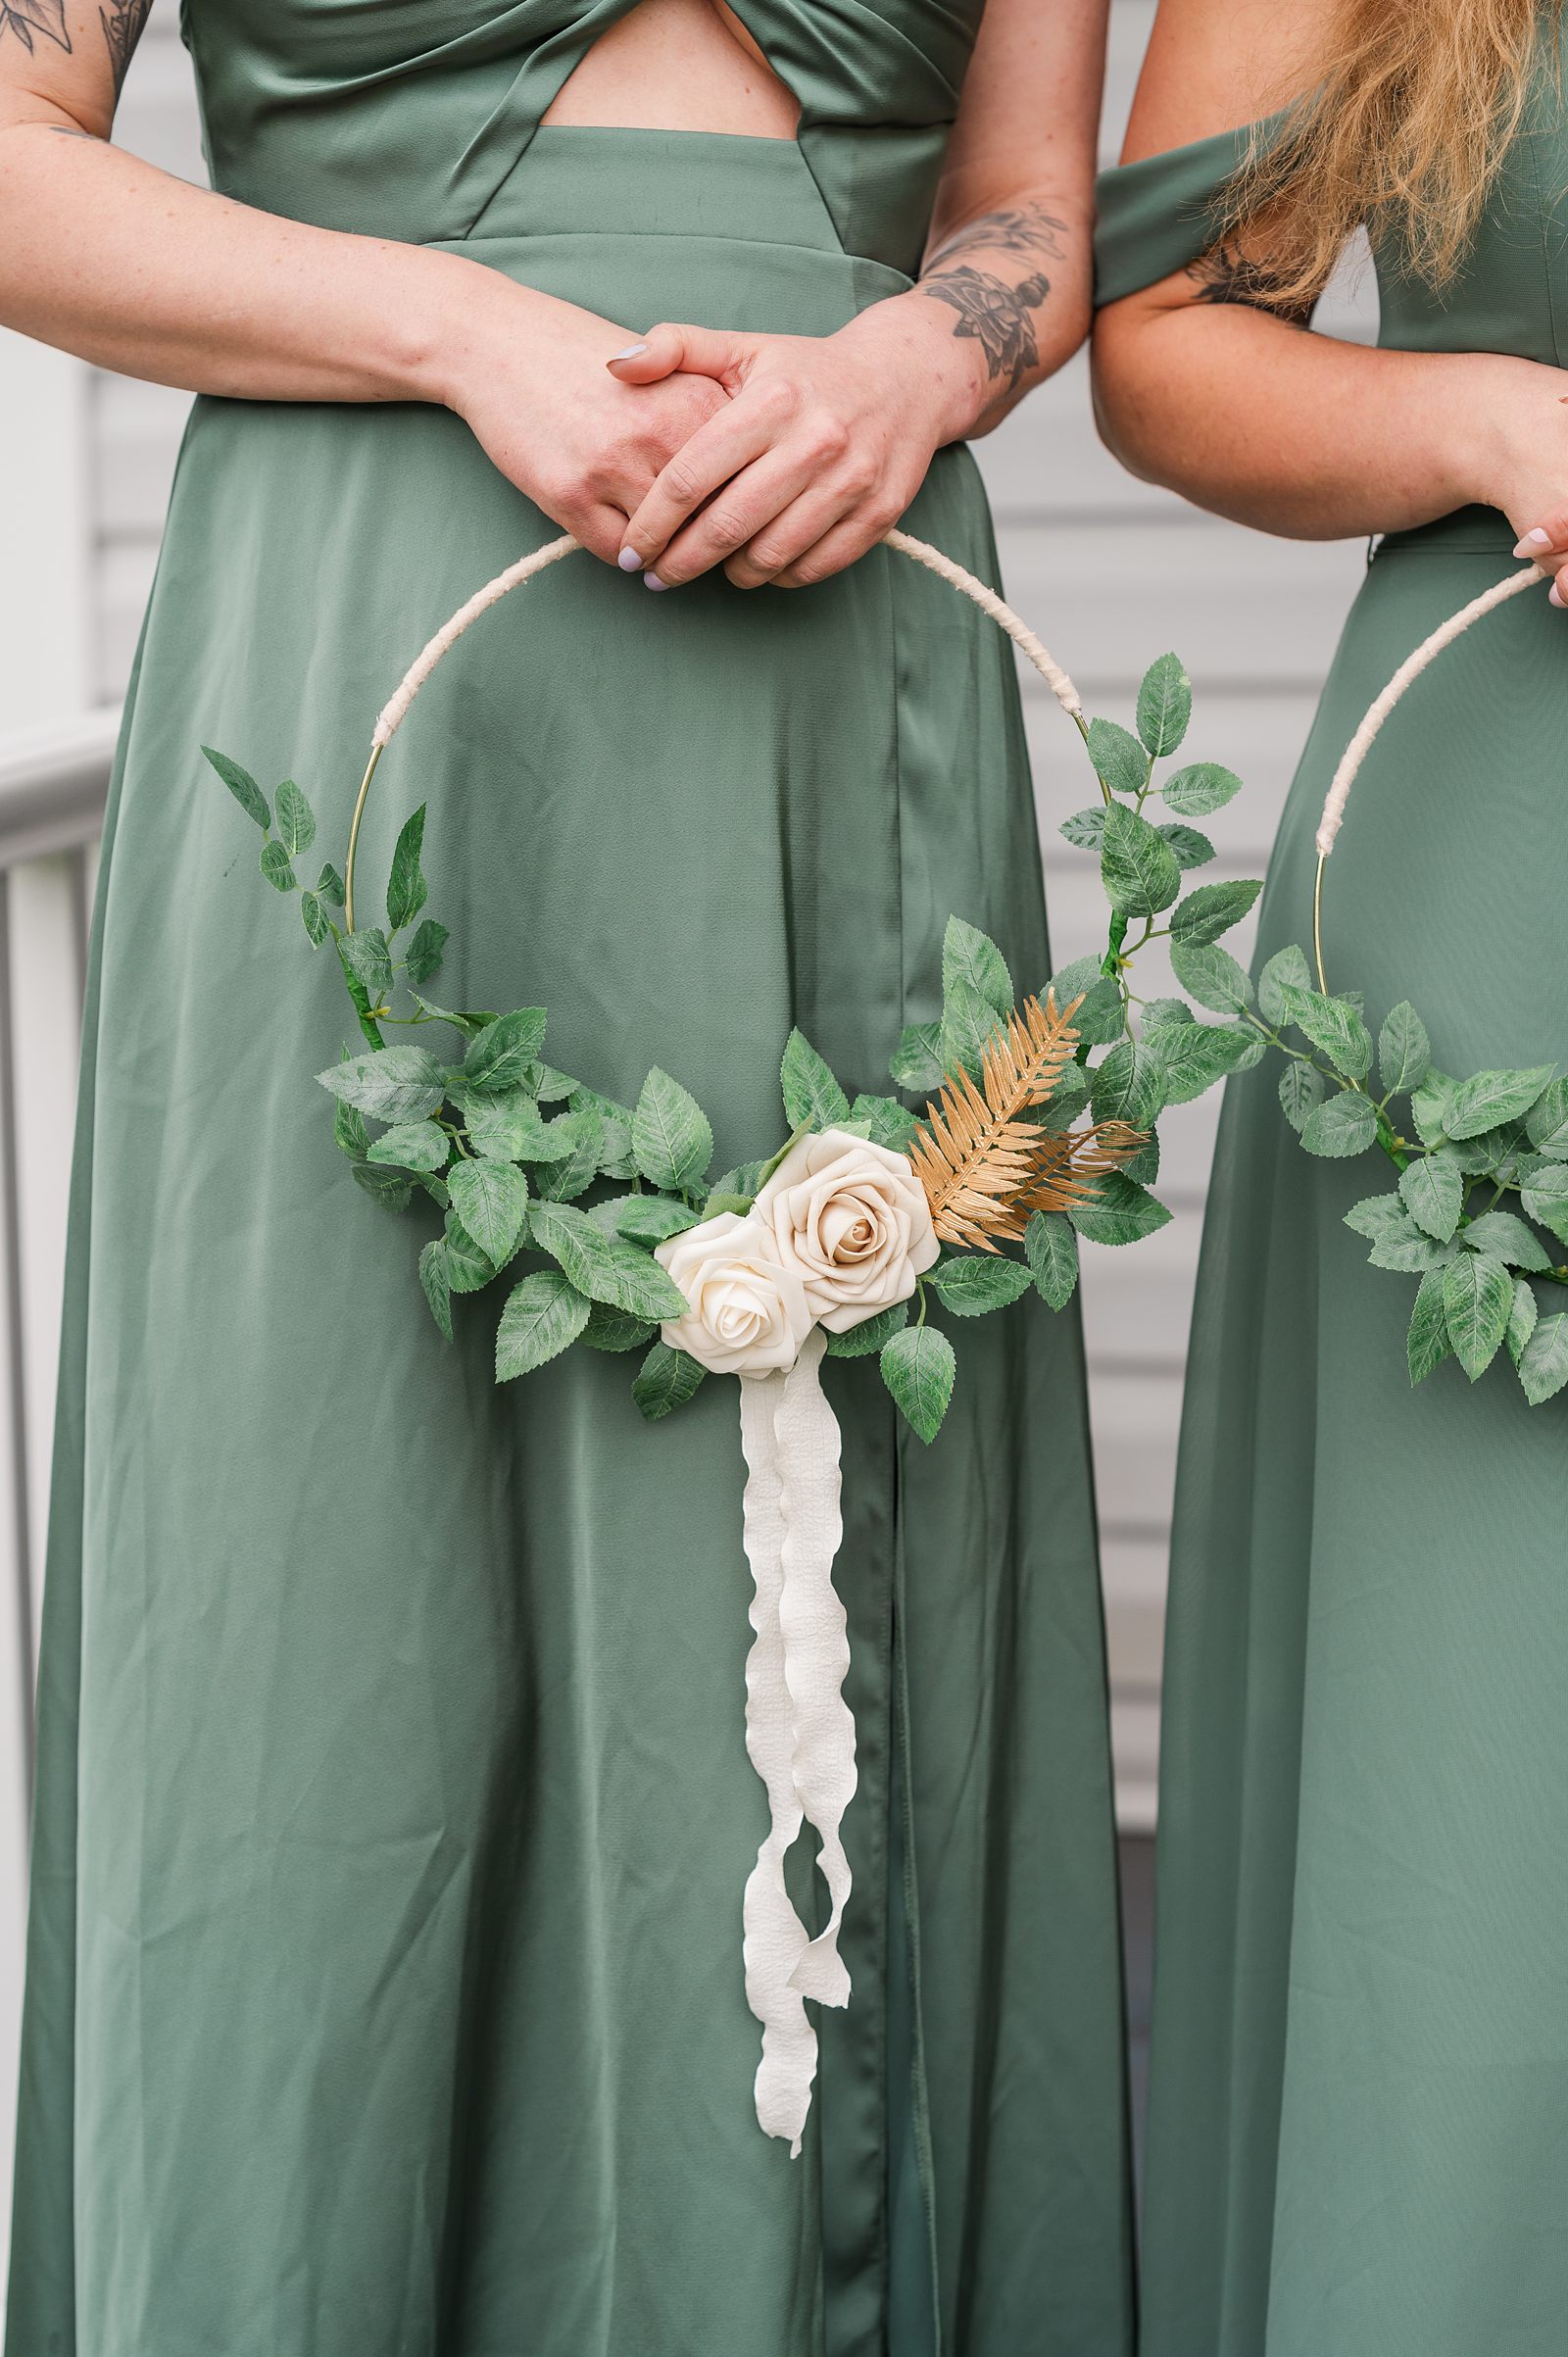 Handmade Floral Hoops for Bridesmaids at Spring Richmond Wedding